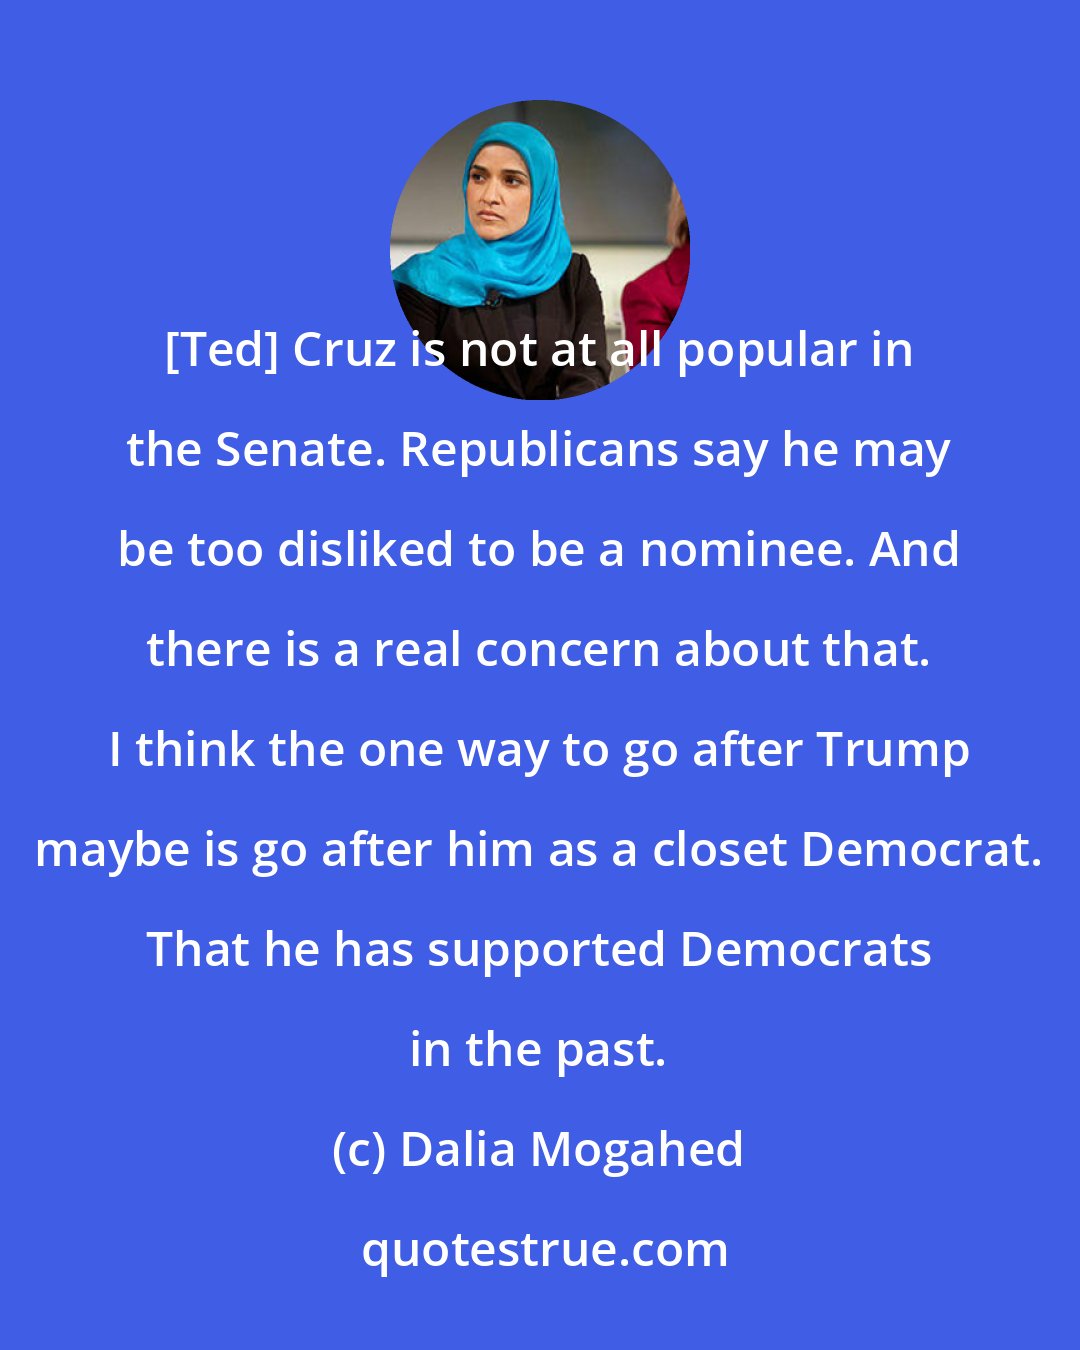 Dalia Mogahed: [Ted] Cruz is not at all popular in the Senate. Republicans say he may be too disliked to be a nominee. And there is a real concern about that. I think the one way to go after Trump maybe is go after him as a closet Democrat. That he has supported Democrats in the past.